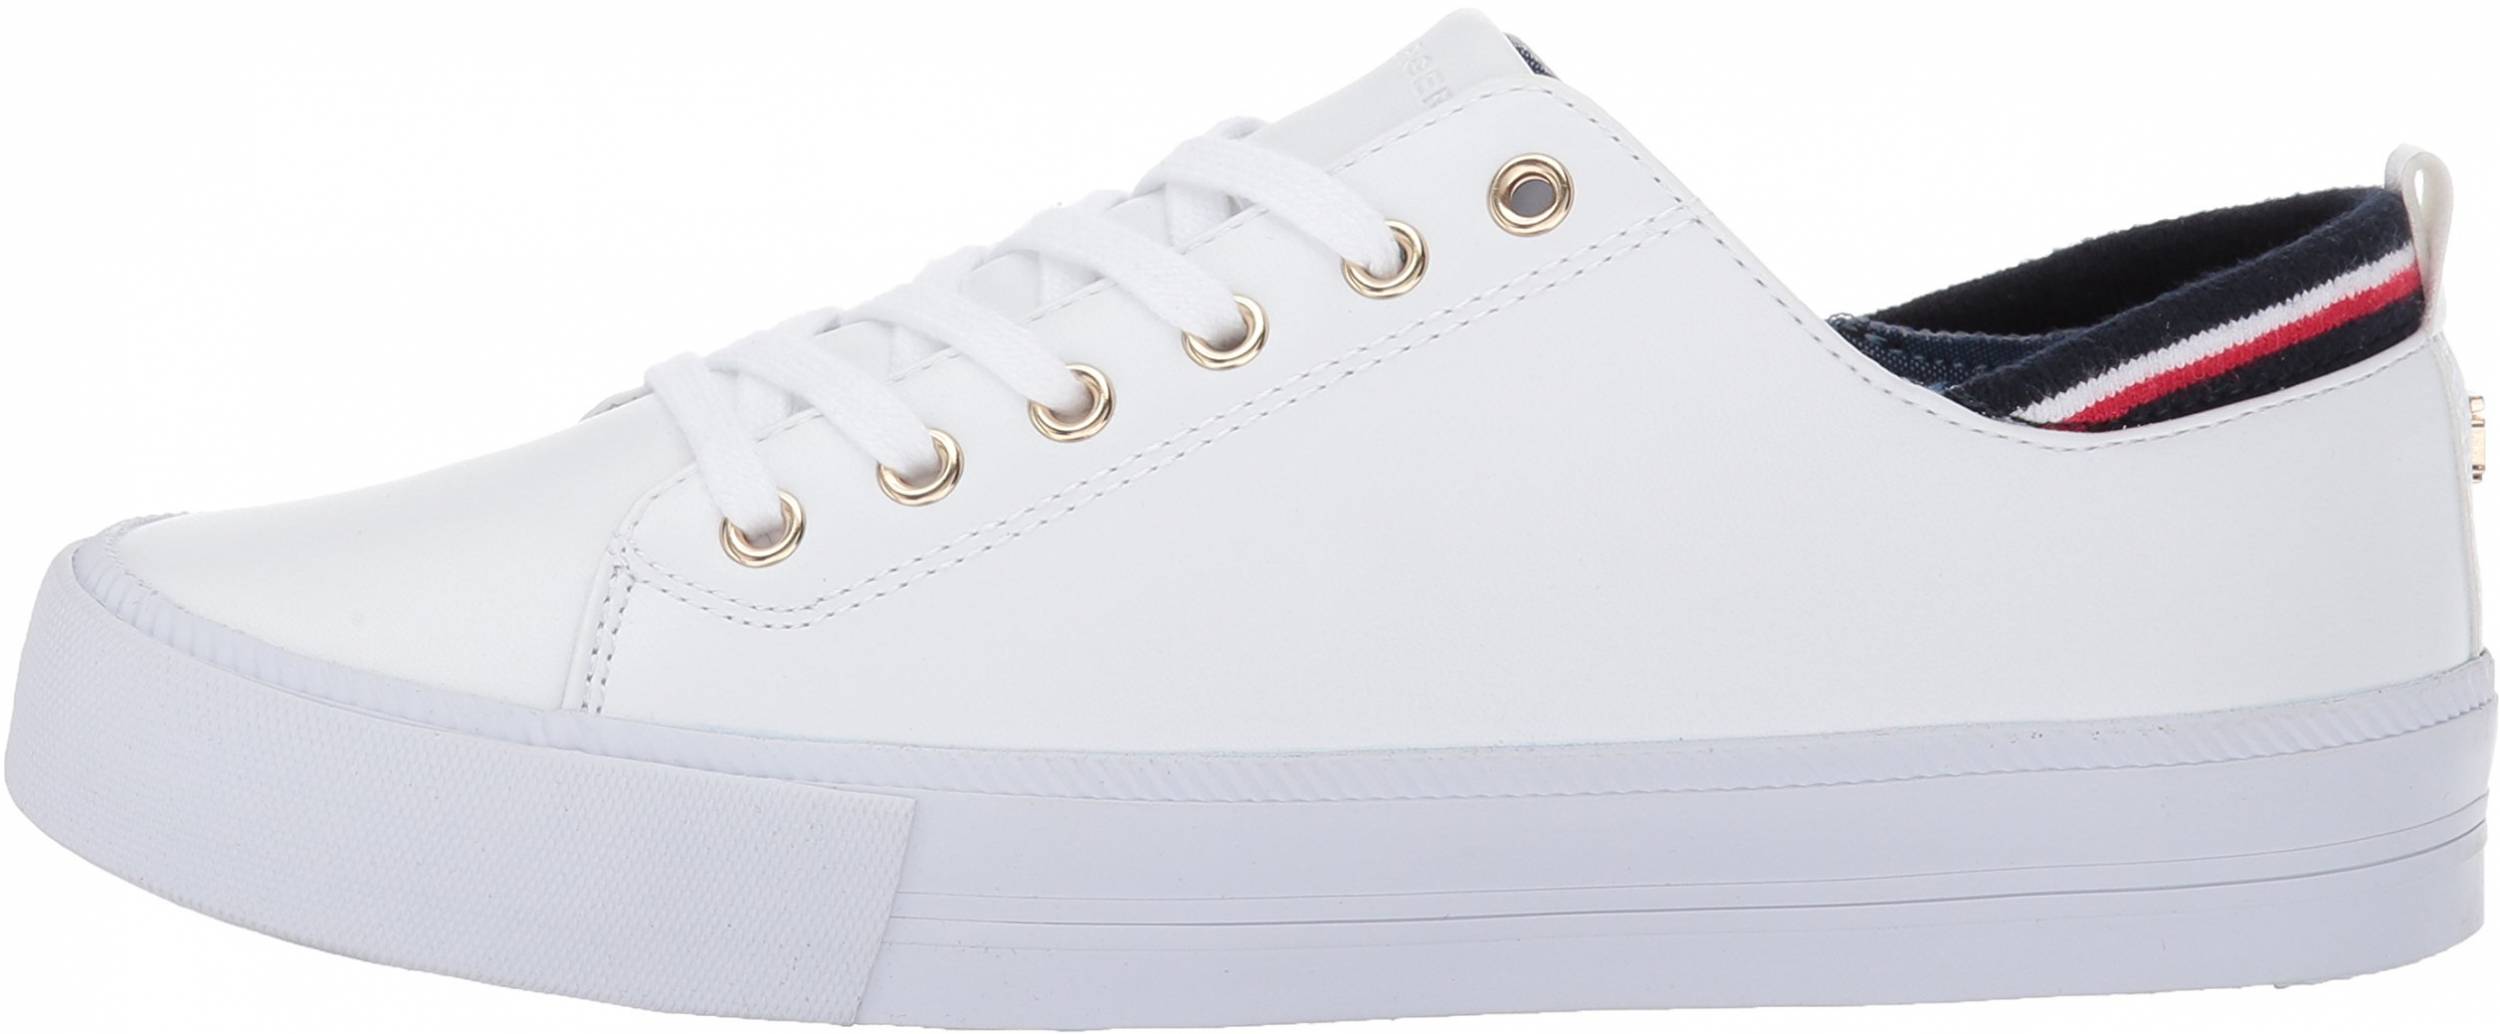 tommy hilfiger white women's shoes